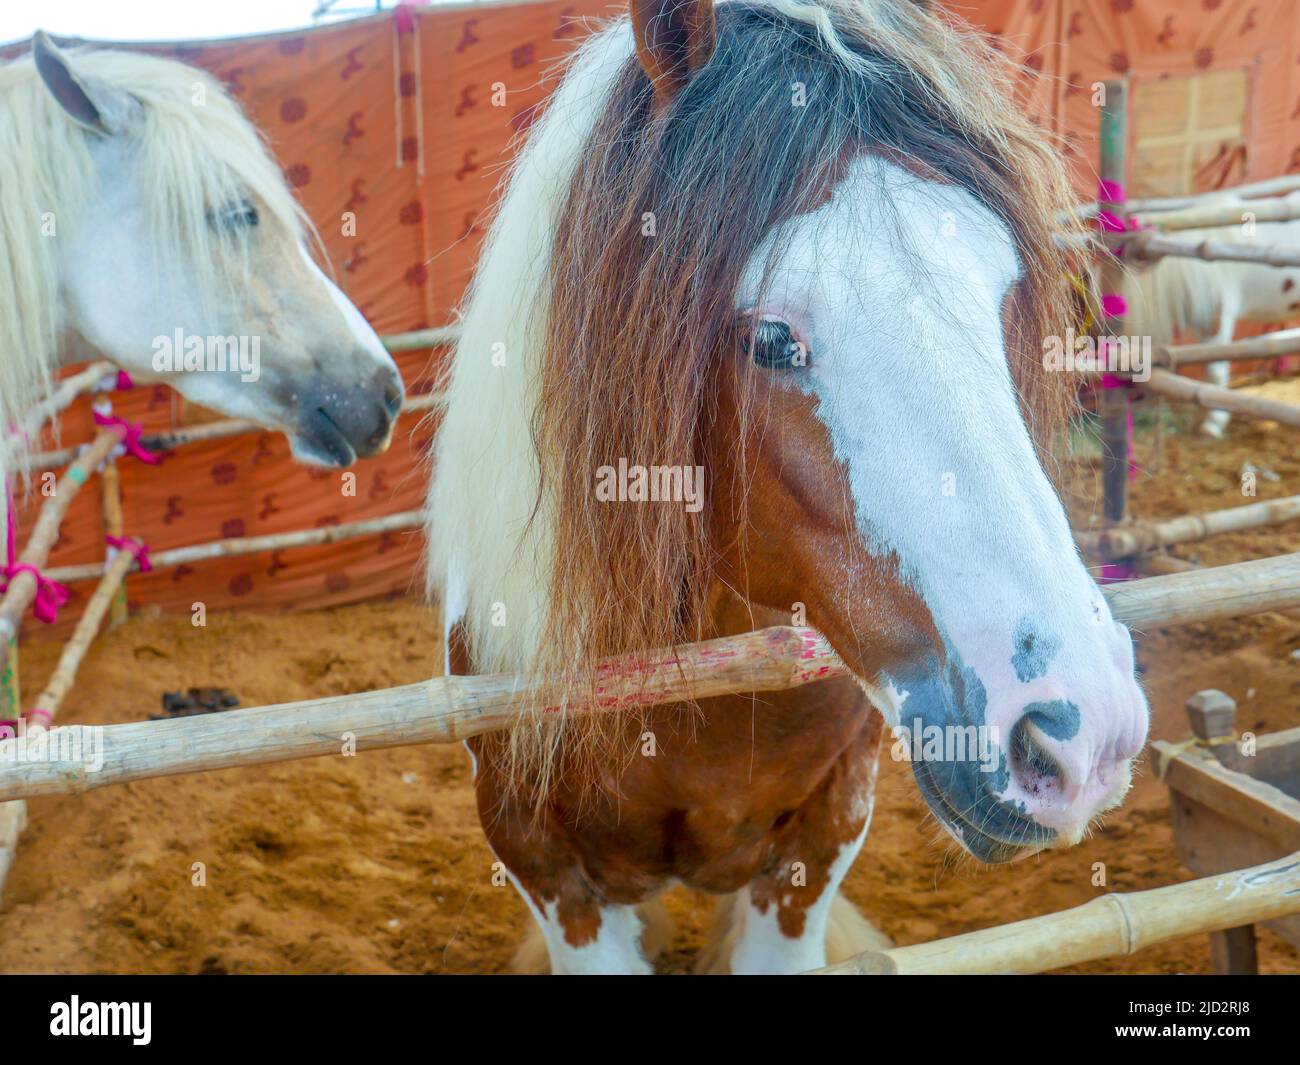 Gypsy horse also known as Traditional Gypsy Cob, Irish Cob, Gypsy Horse, Galineers Cob or Gypsy Vanner standing in horse stable Stock Photo